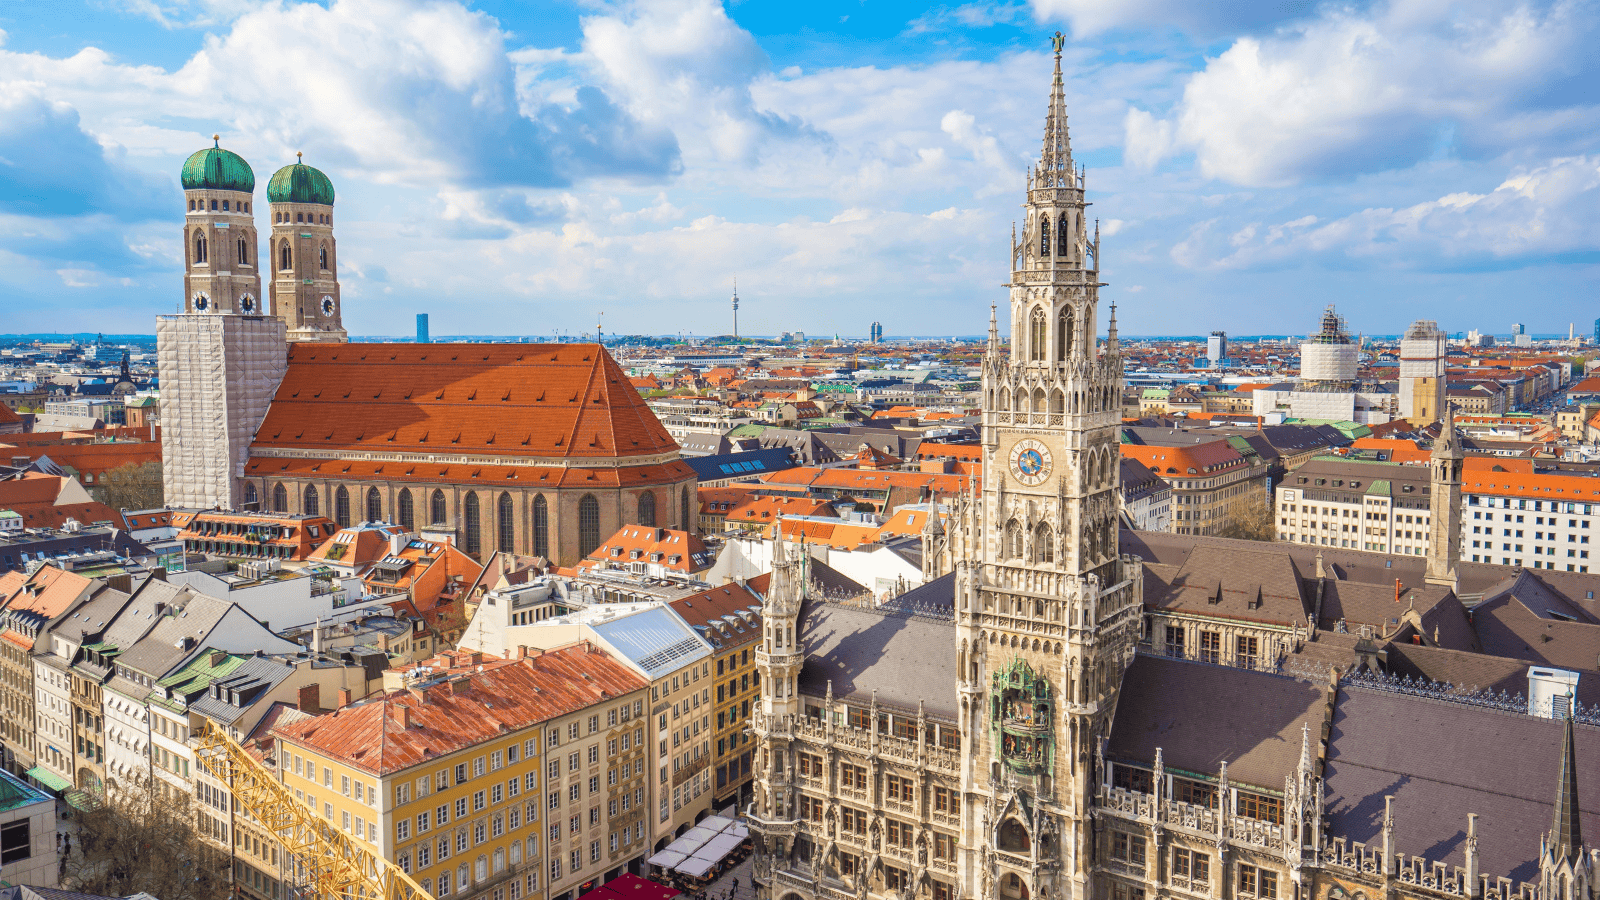 <p>Munich, one of Germany’s largest cities, is a top destination for those with accessibility concerns. The relatively flat cityscape allows people in wheelchairs to enjoy the centuries-old cityscape.</p><p>Most of Munich’s trams and metro stations have ramps and elevators. Meanwhile, the city has equipped modern hotels, restaurants, and public spaces with lifts and handrails.</p>